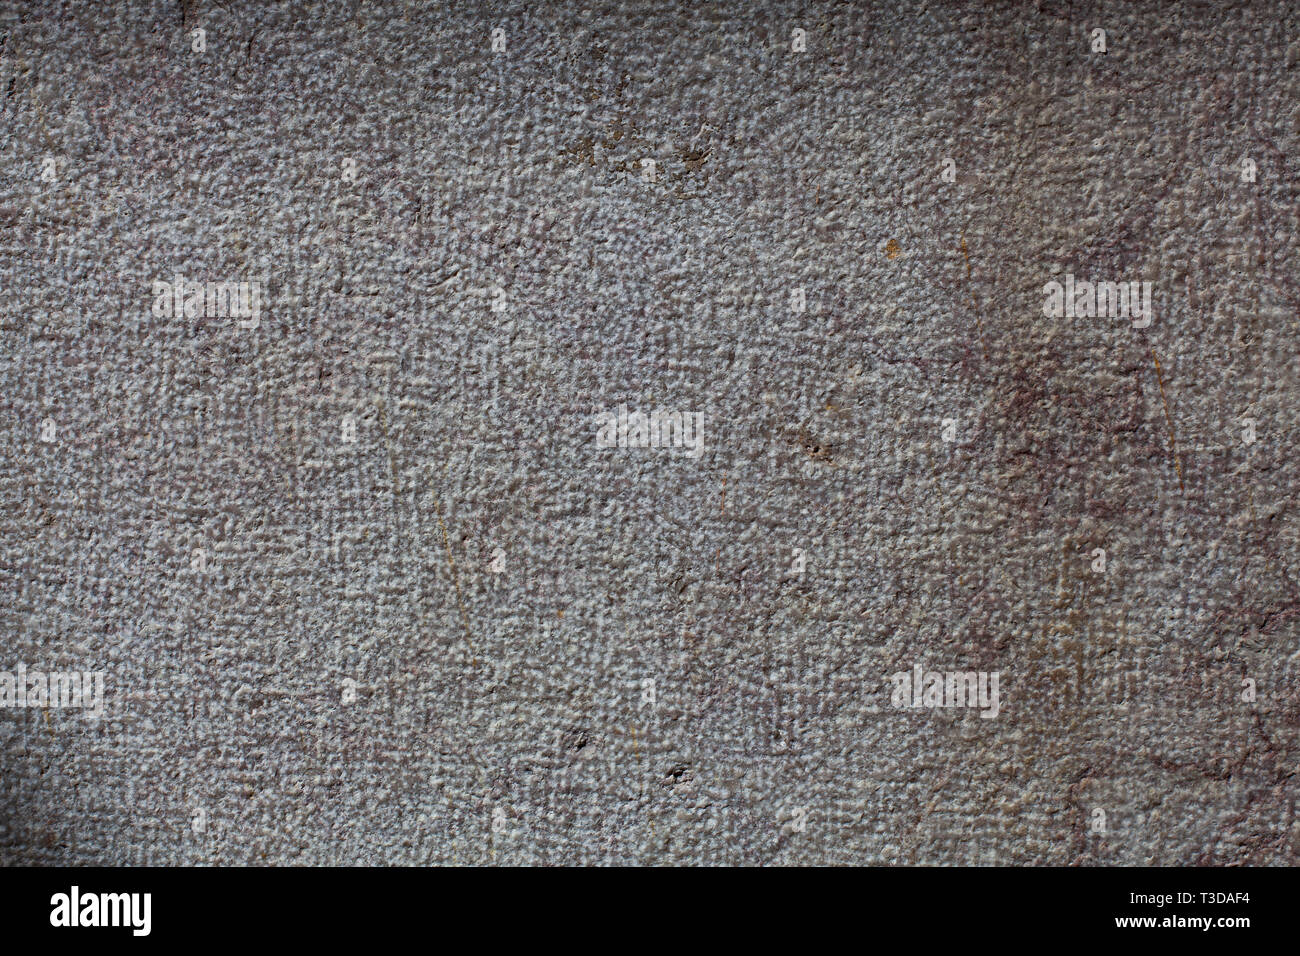 Wall cladding in natural stone ideal to be used as background for text. Stock Photo